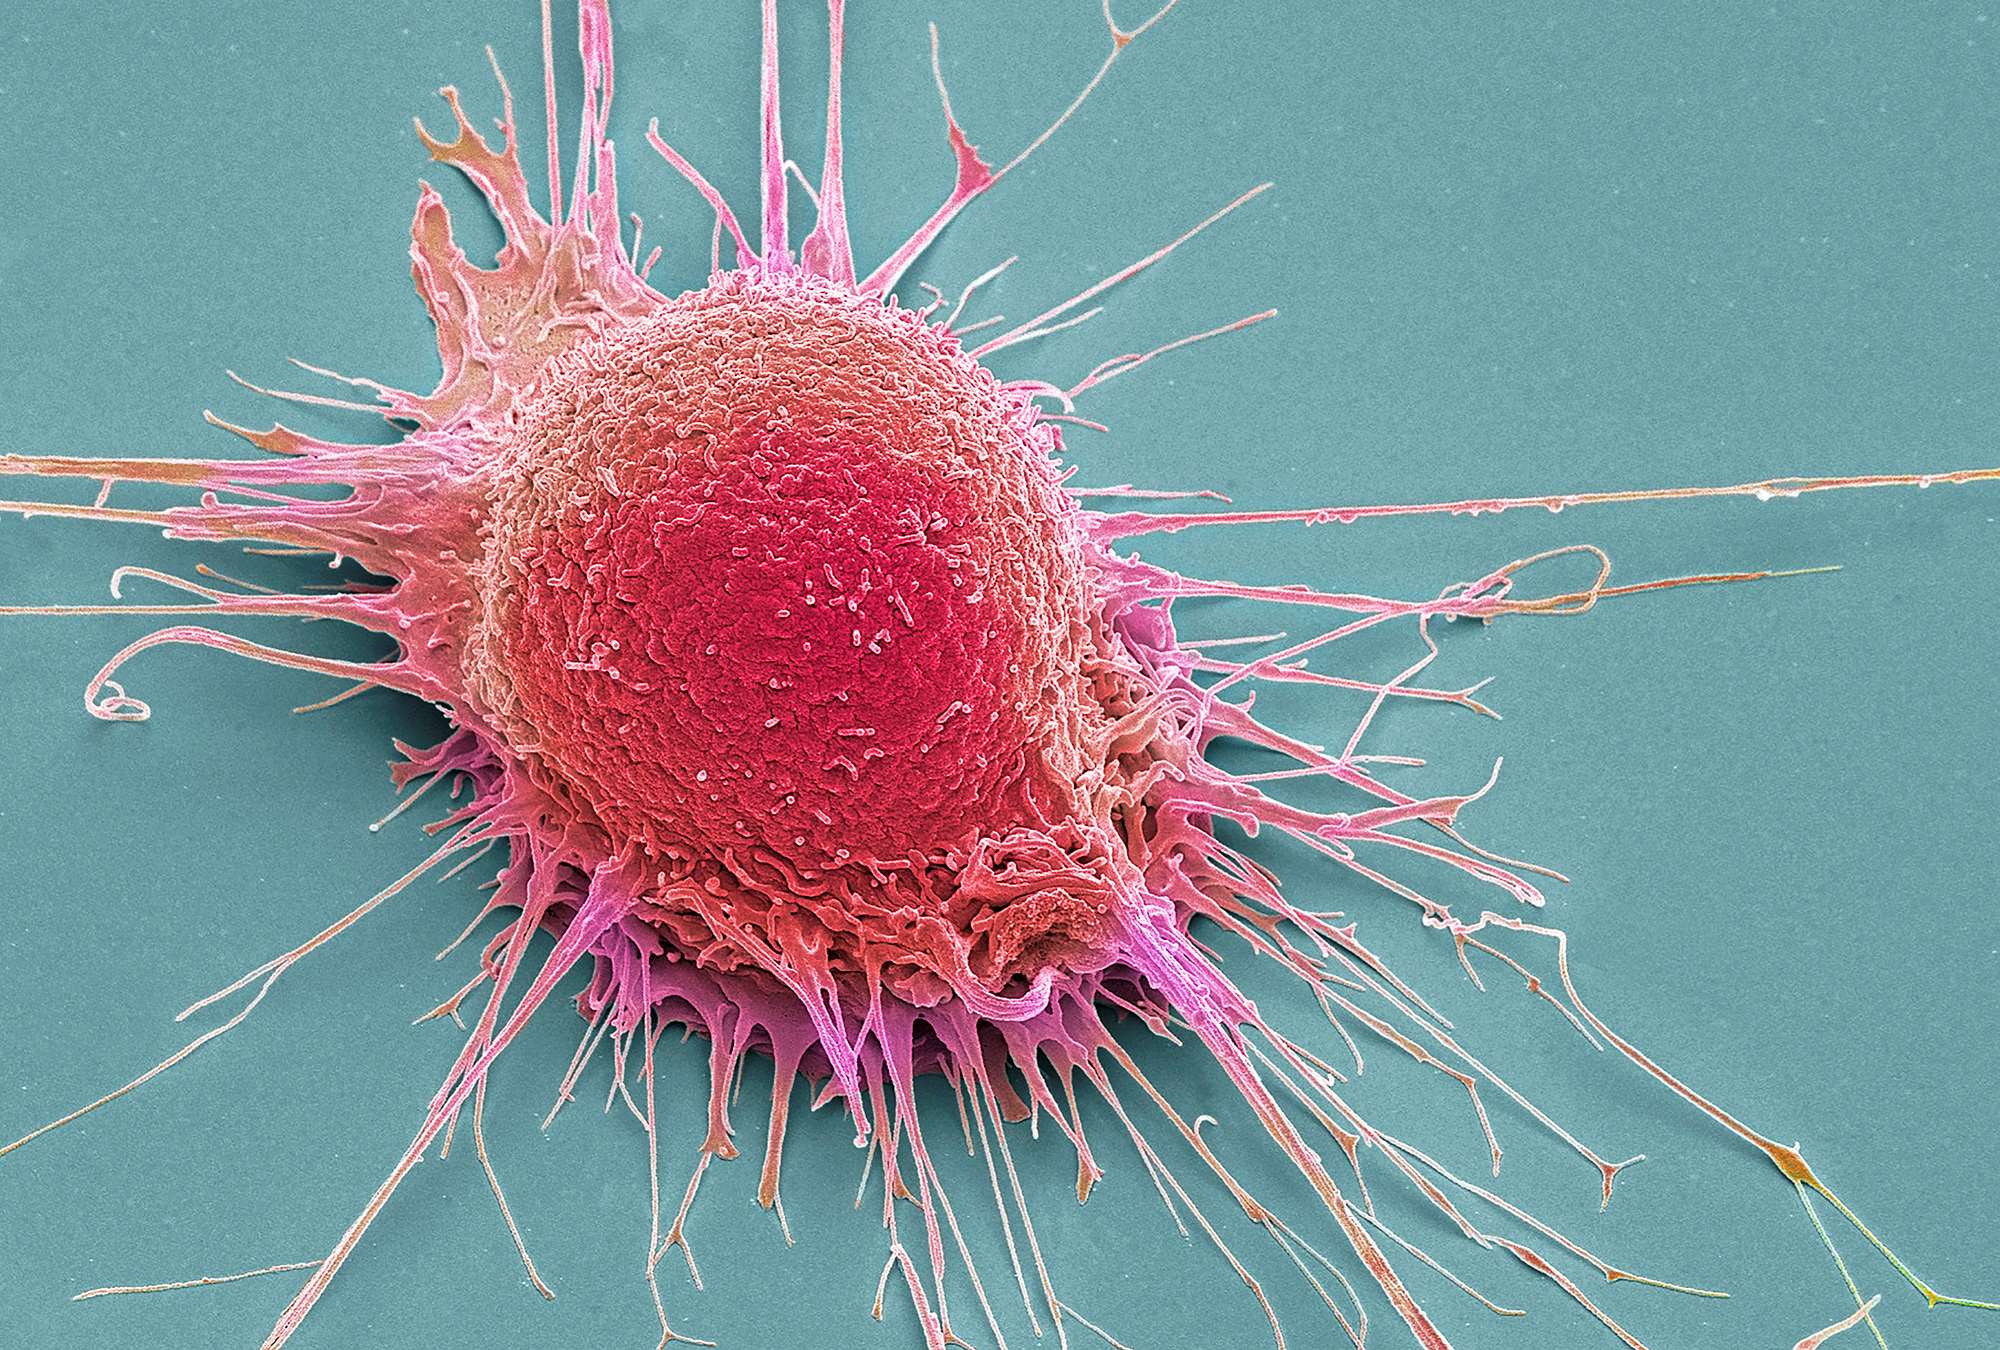  Prostate cancer cell